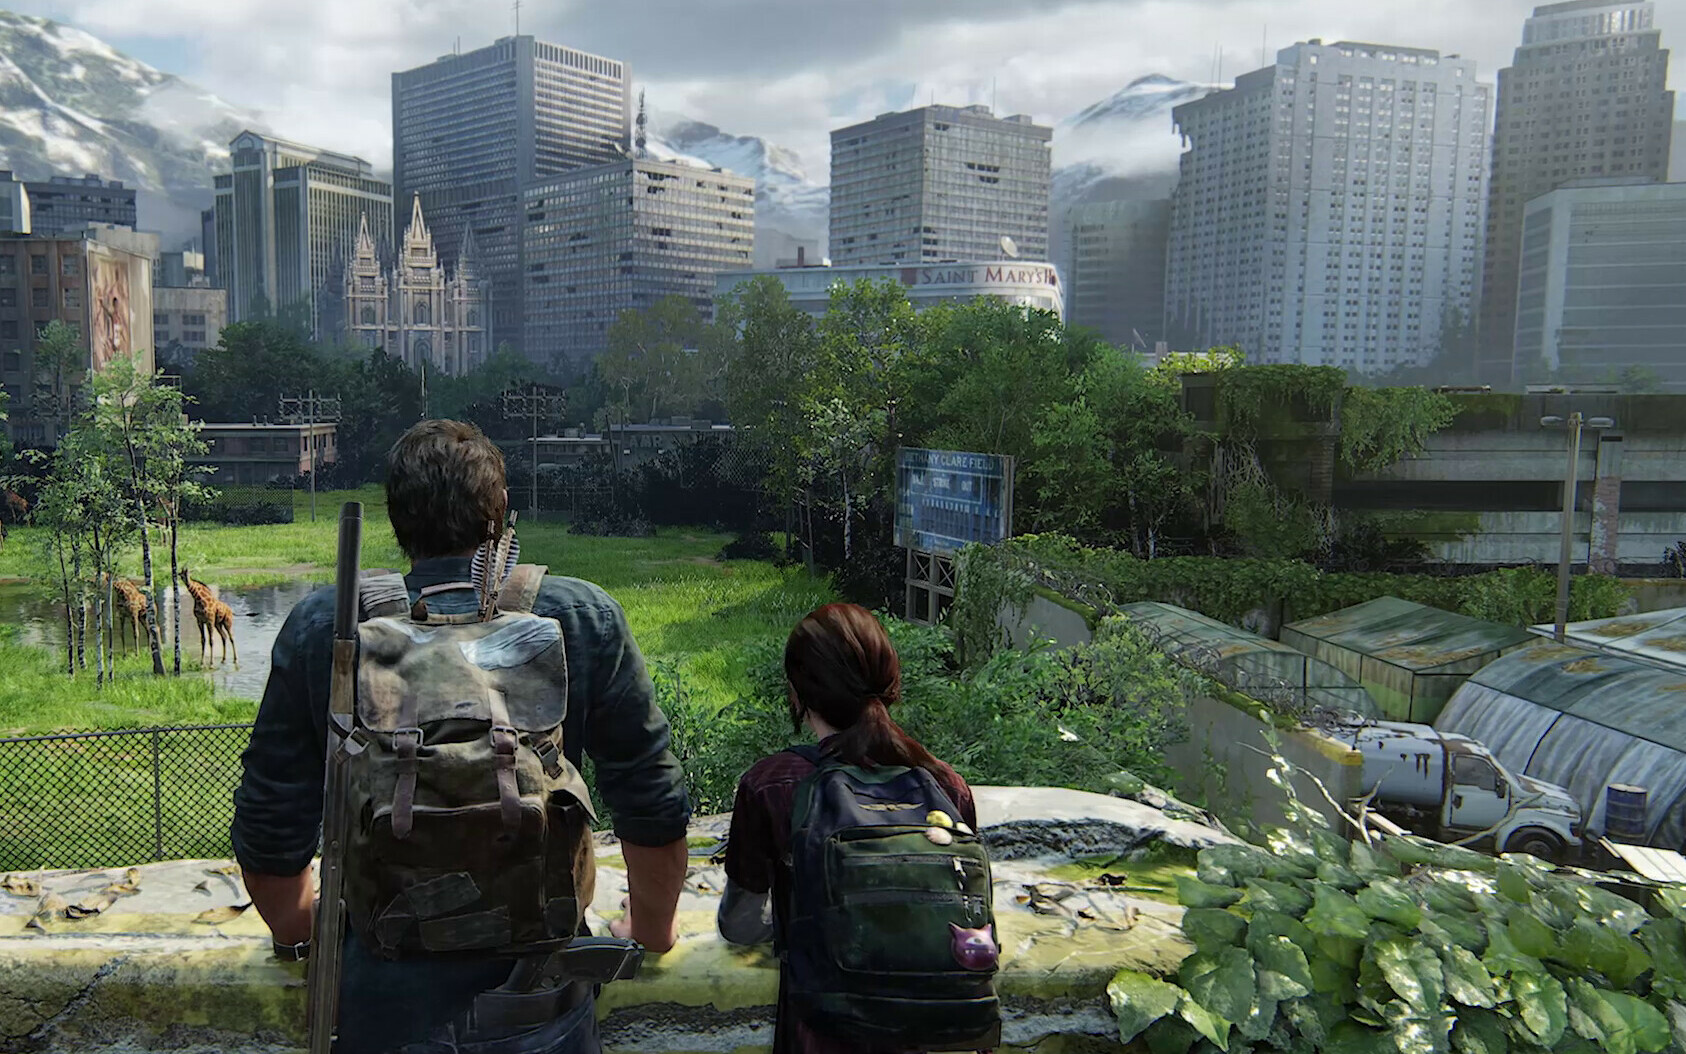 The Last of Us Part I PC Update 1.0.3.0 Fixes Audio, UI, And Visual Bugs -  GameSpot